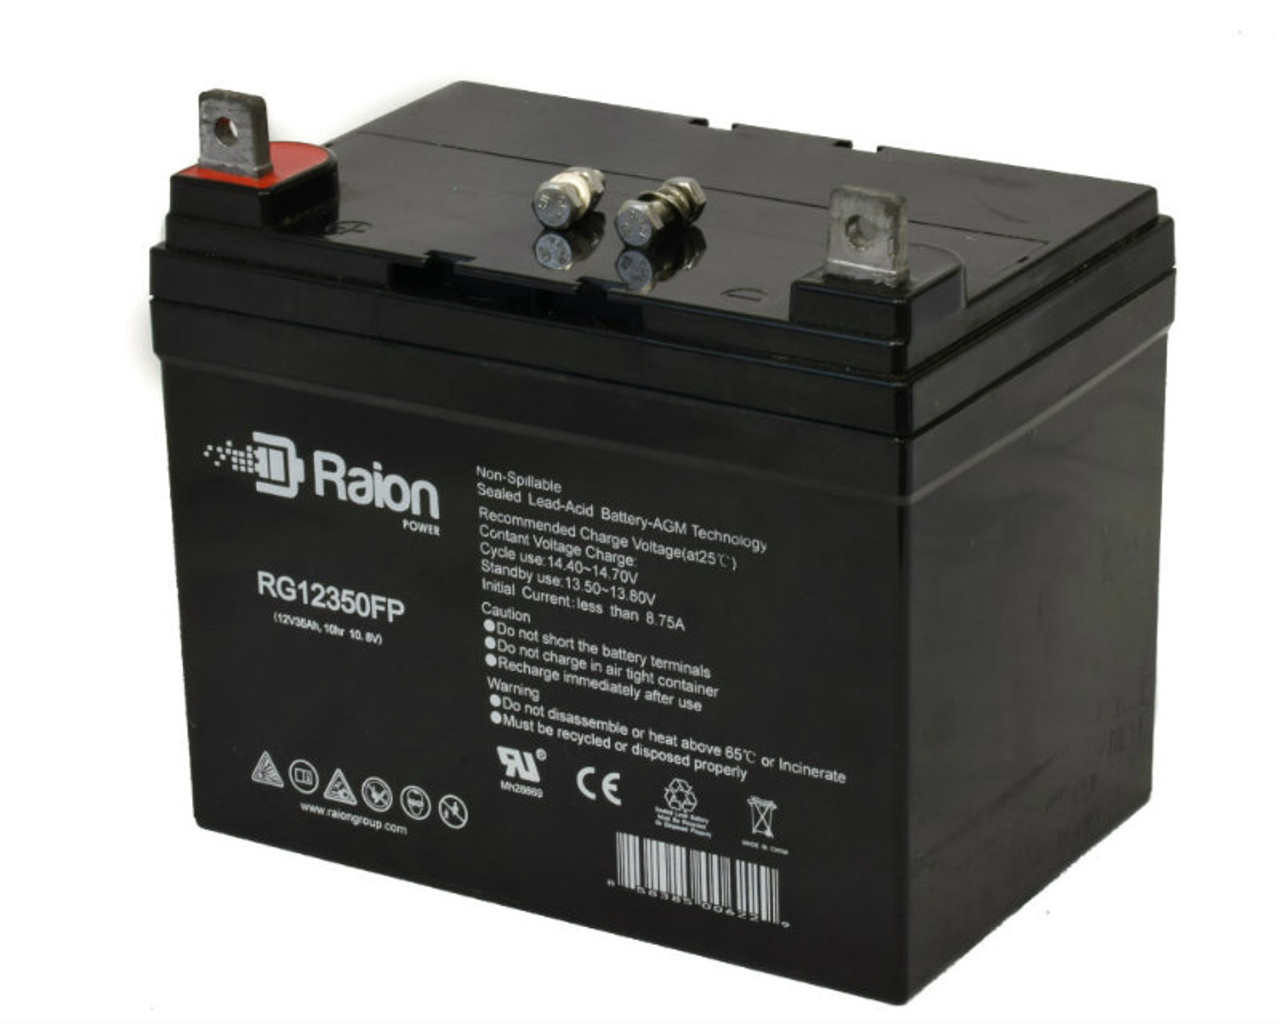 Raion Power Replacement 12V 35Ah RG12350FP Mobility Scooter Battery for Burke Mobility Scout Midi-Drive (RF - NP)